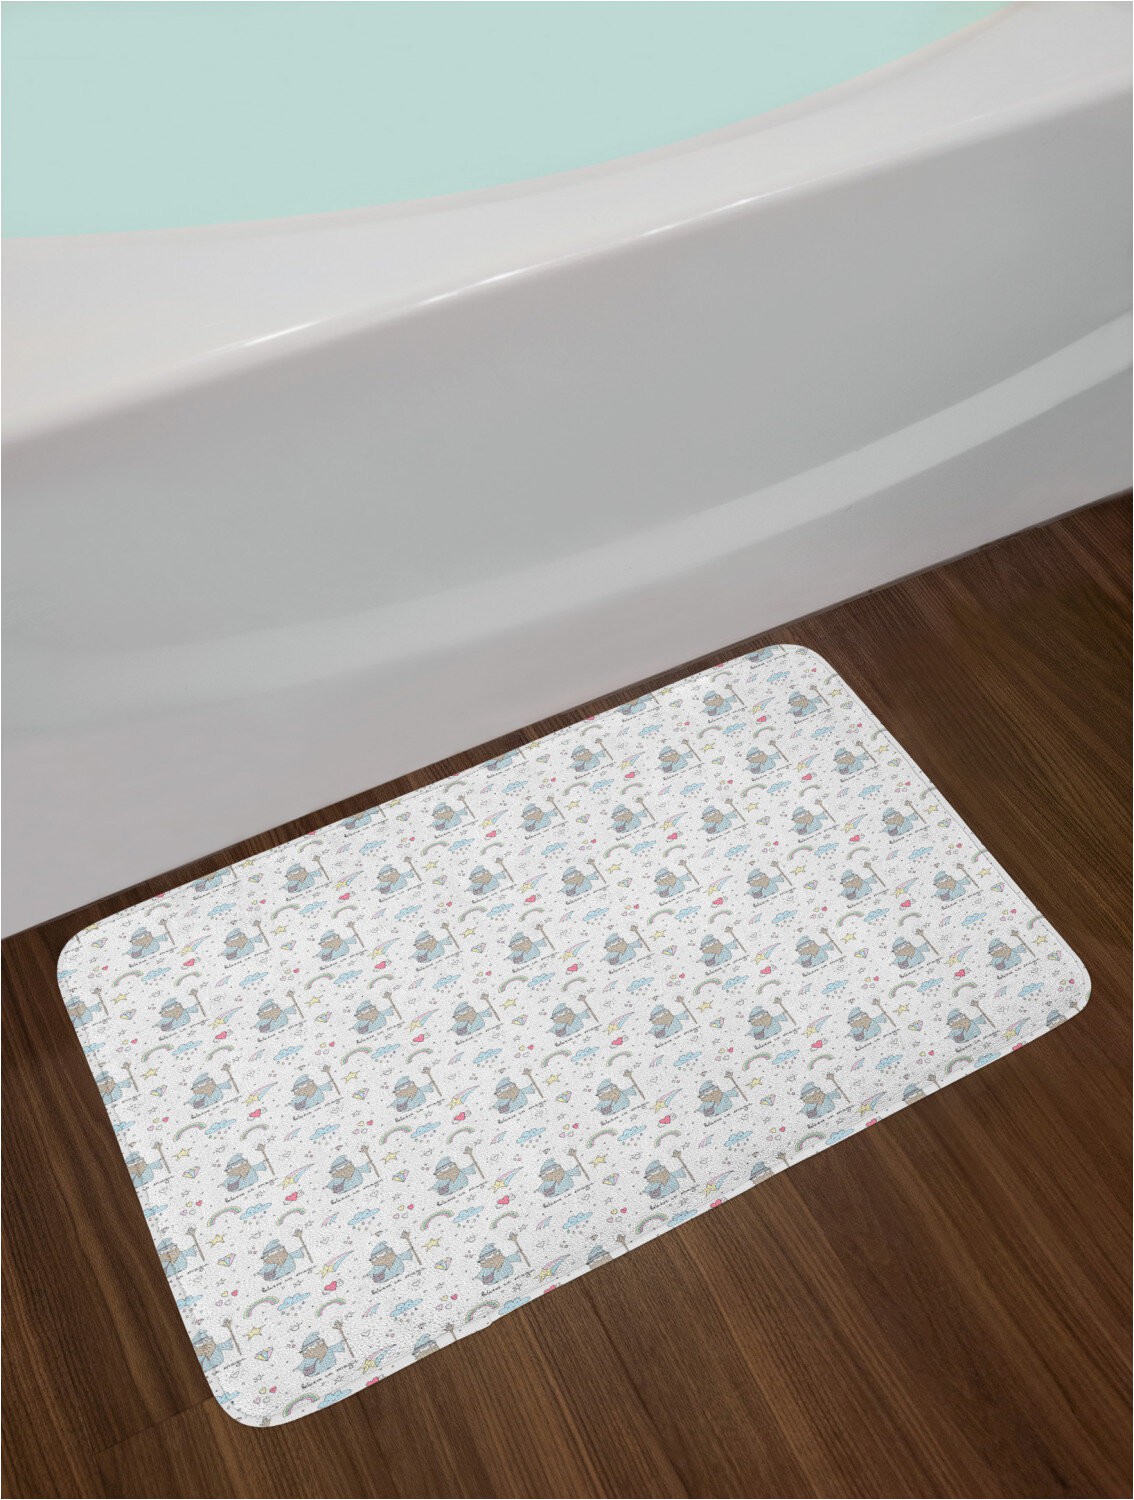 Oval Shaped Bathroom Rugs Wizards and Rainbow Star Heart Shapes Believe In Magic Typography Bath Rug